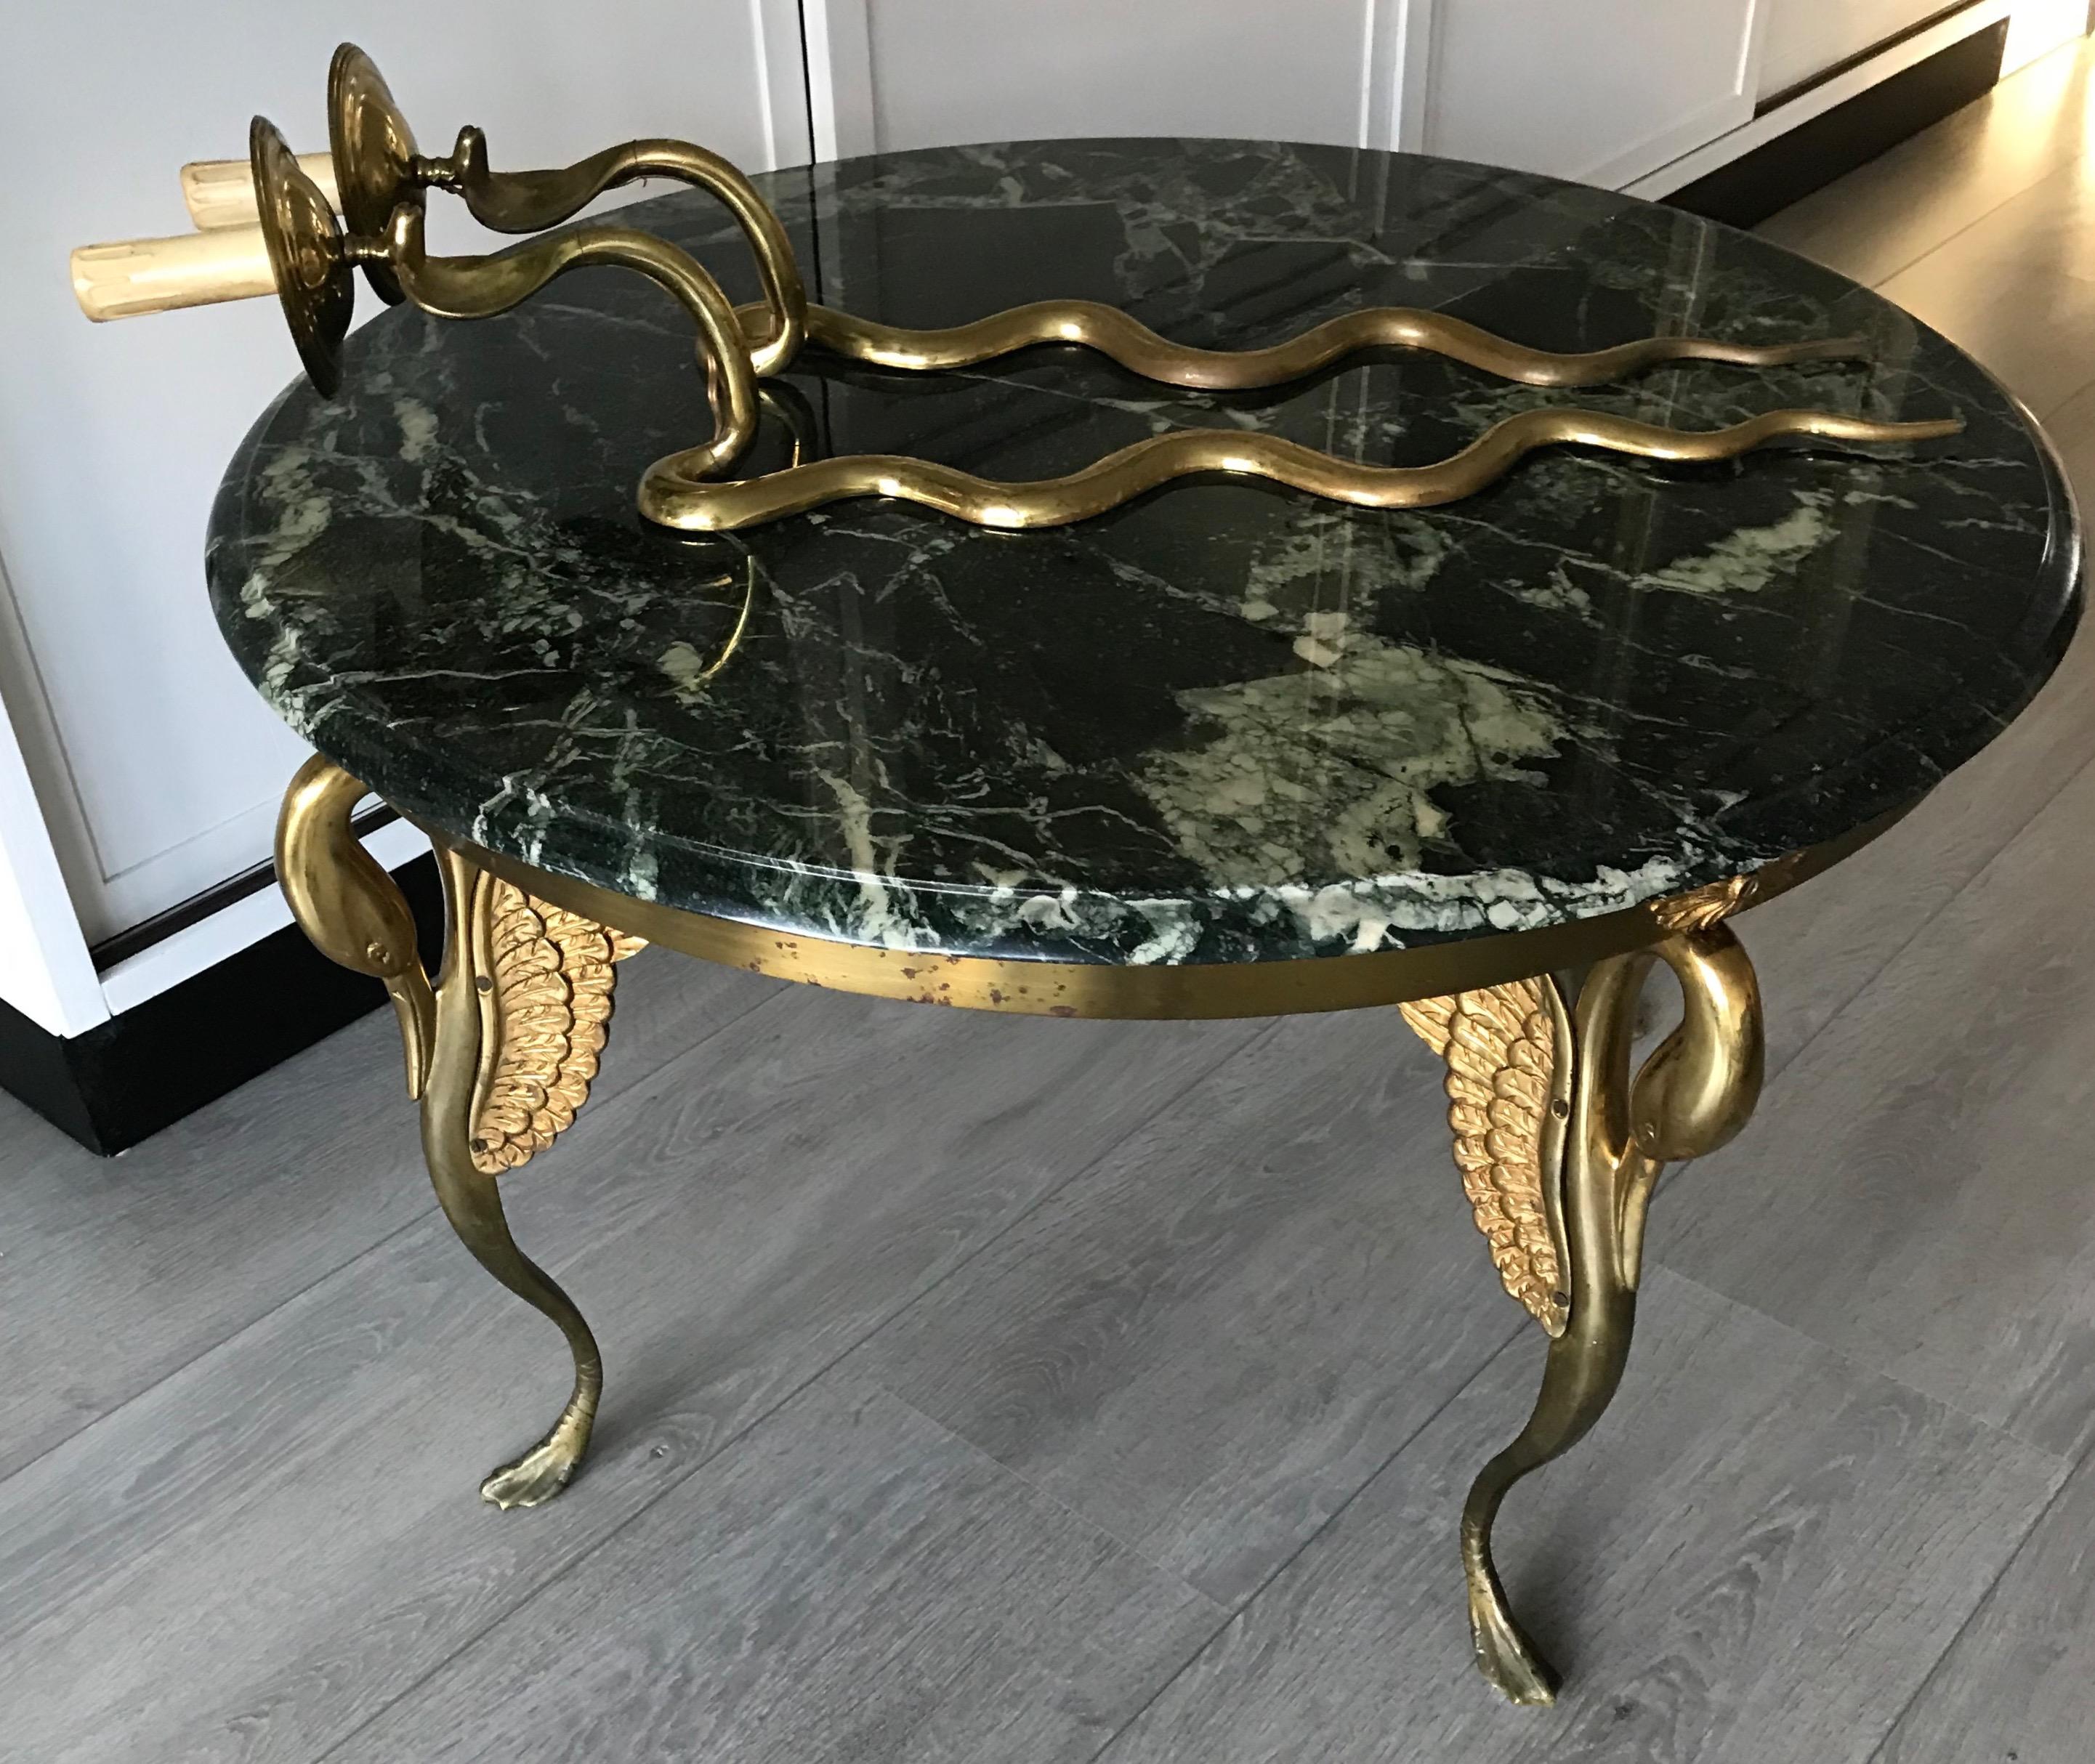 Midcentury Empire Style Coffee Table with Marble Top and Bronze Swan Sculptures 11